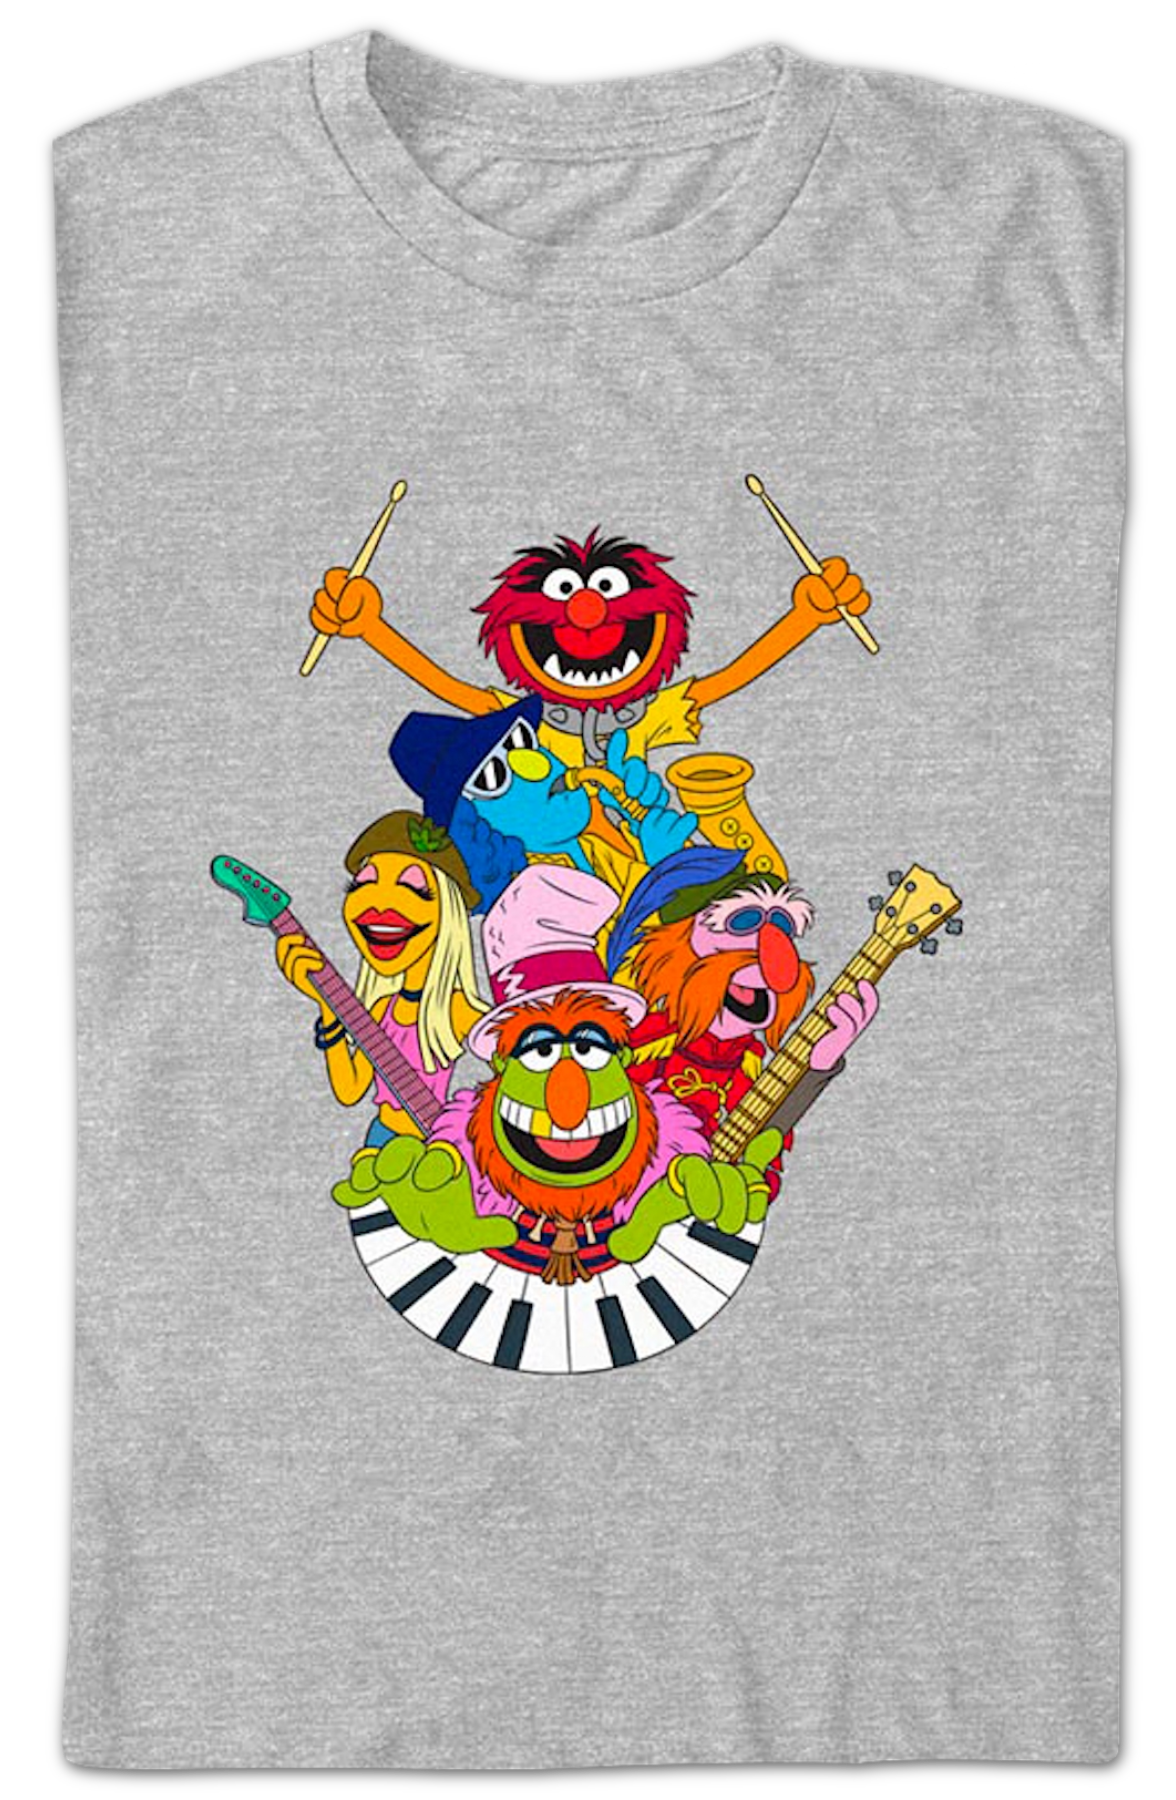 Dr. Teeth And The Electric Mayhem Group Photo Muppets T-Shirt